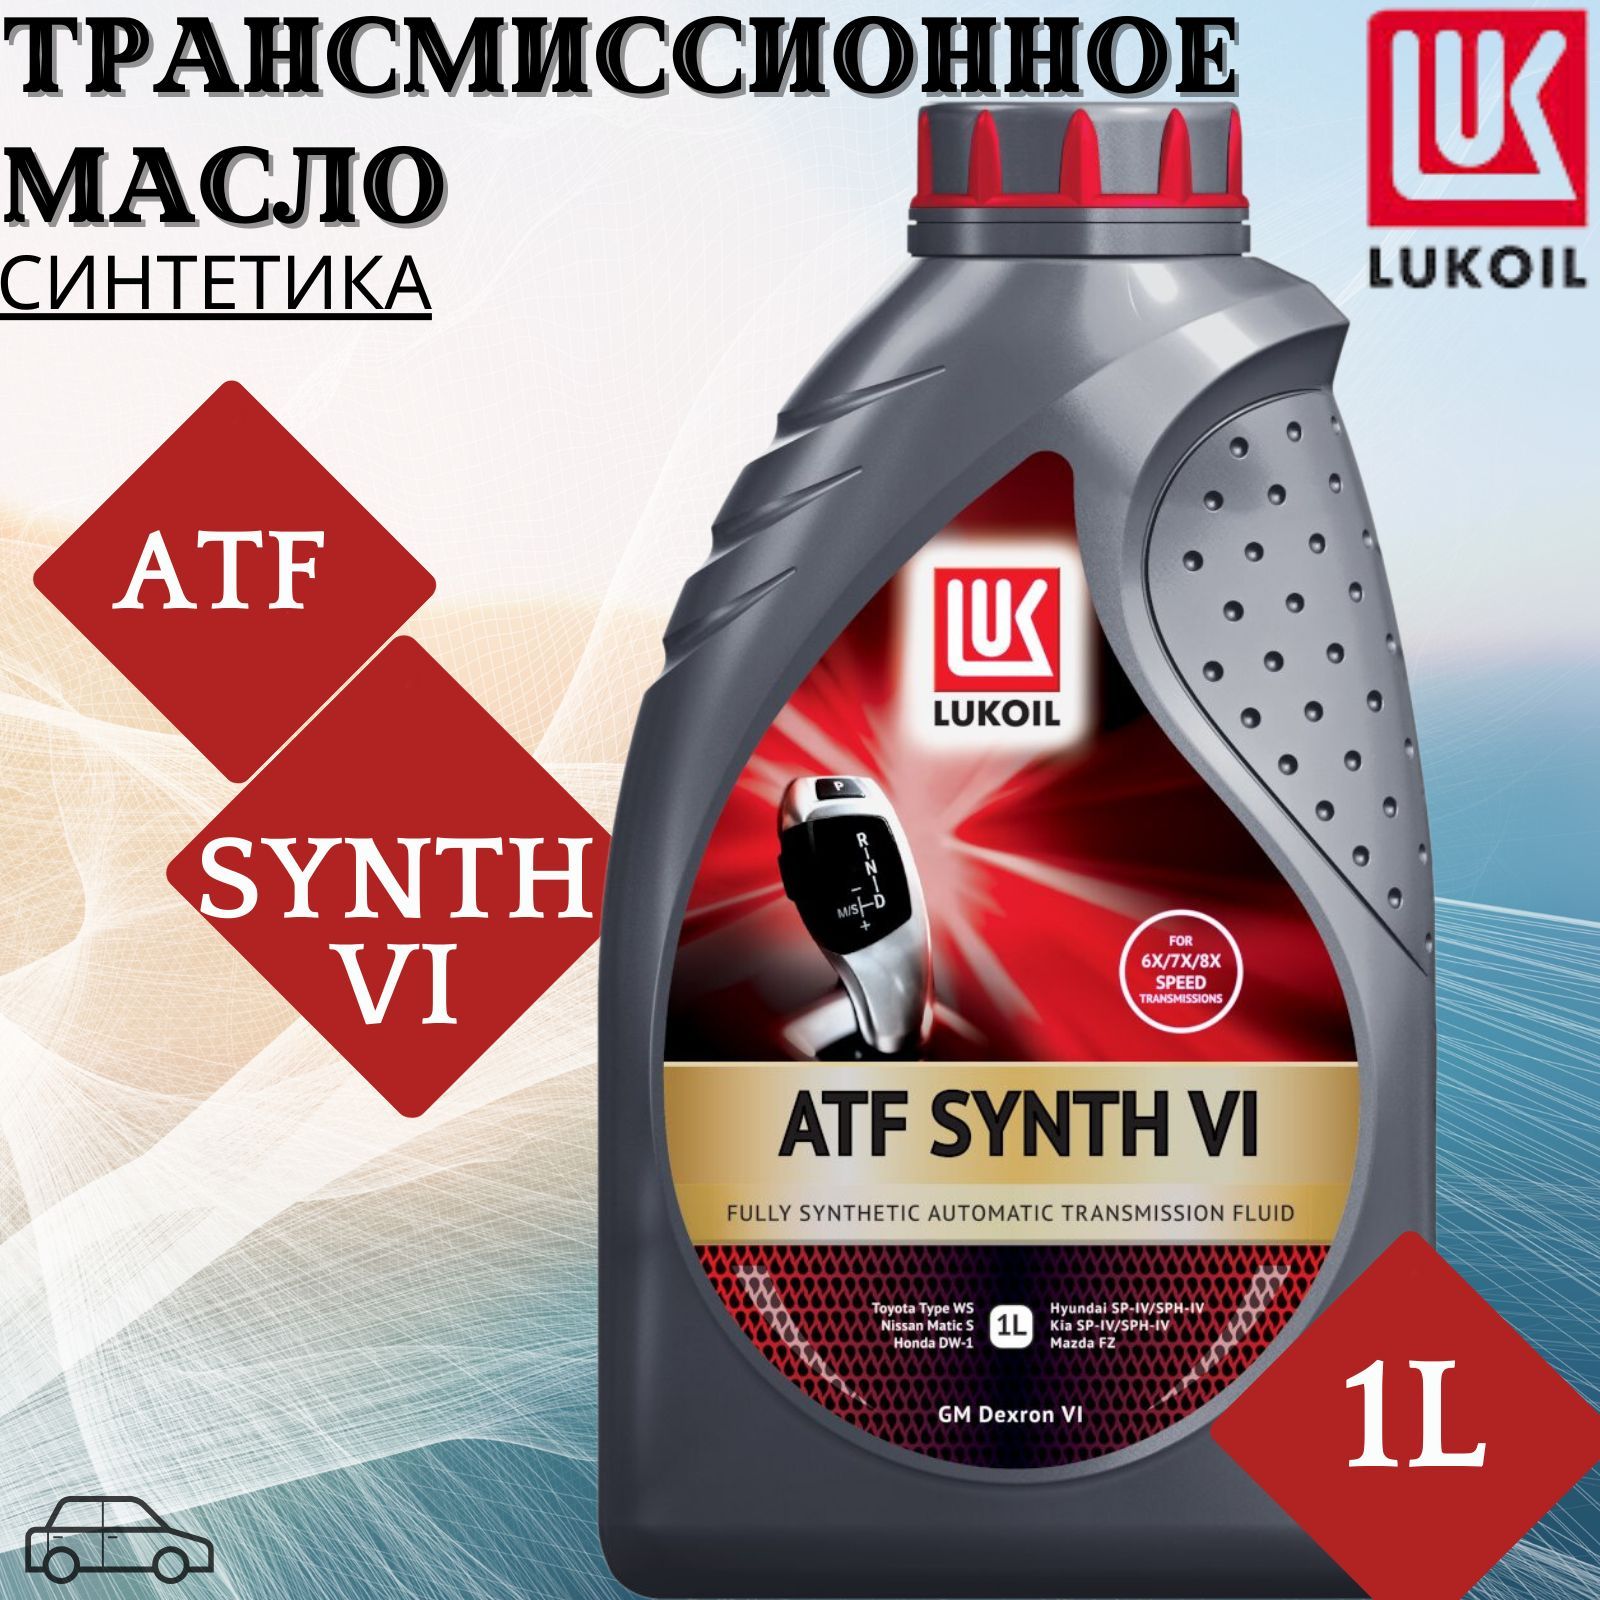 Масло лукойл atf synth. Лукойл ATF Synth v.